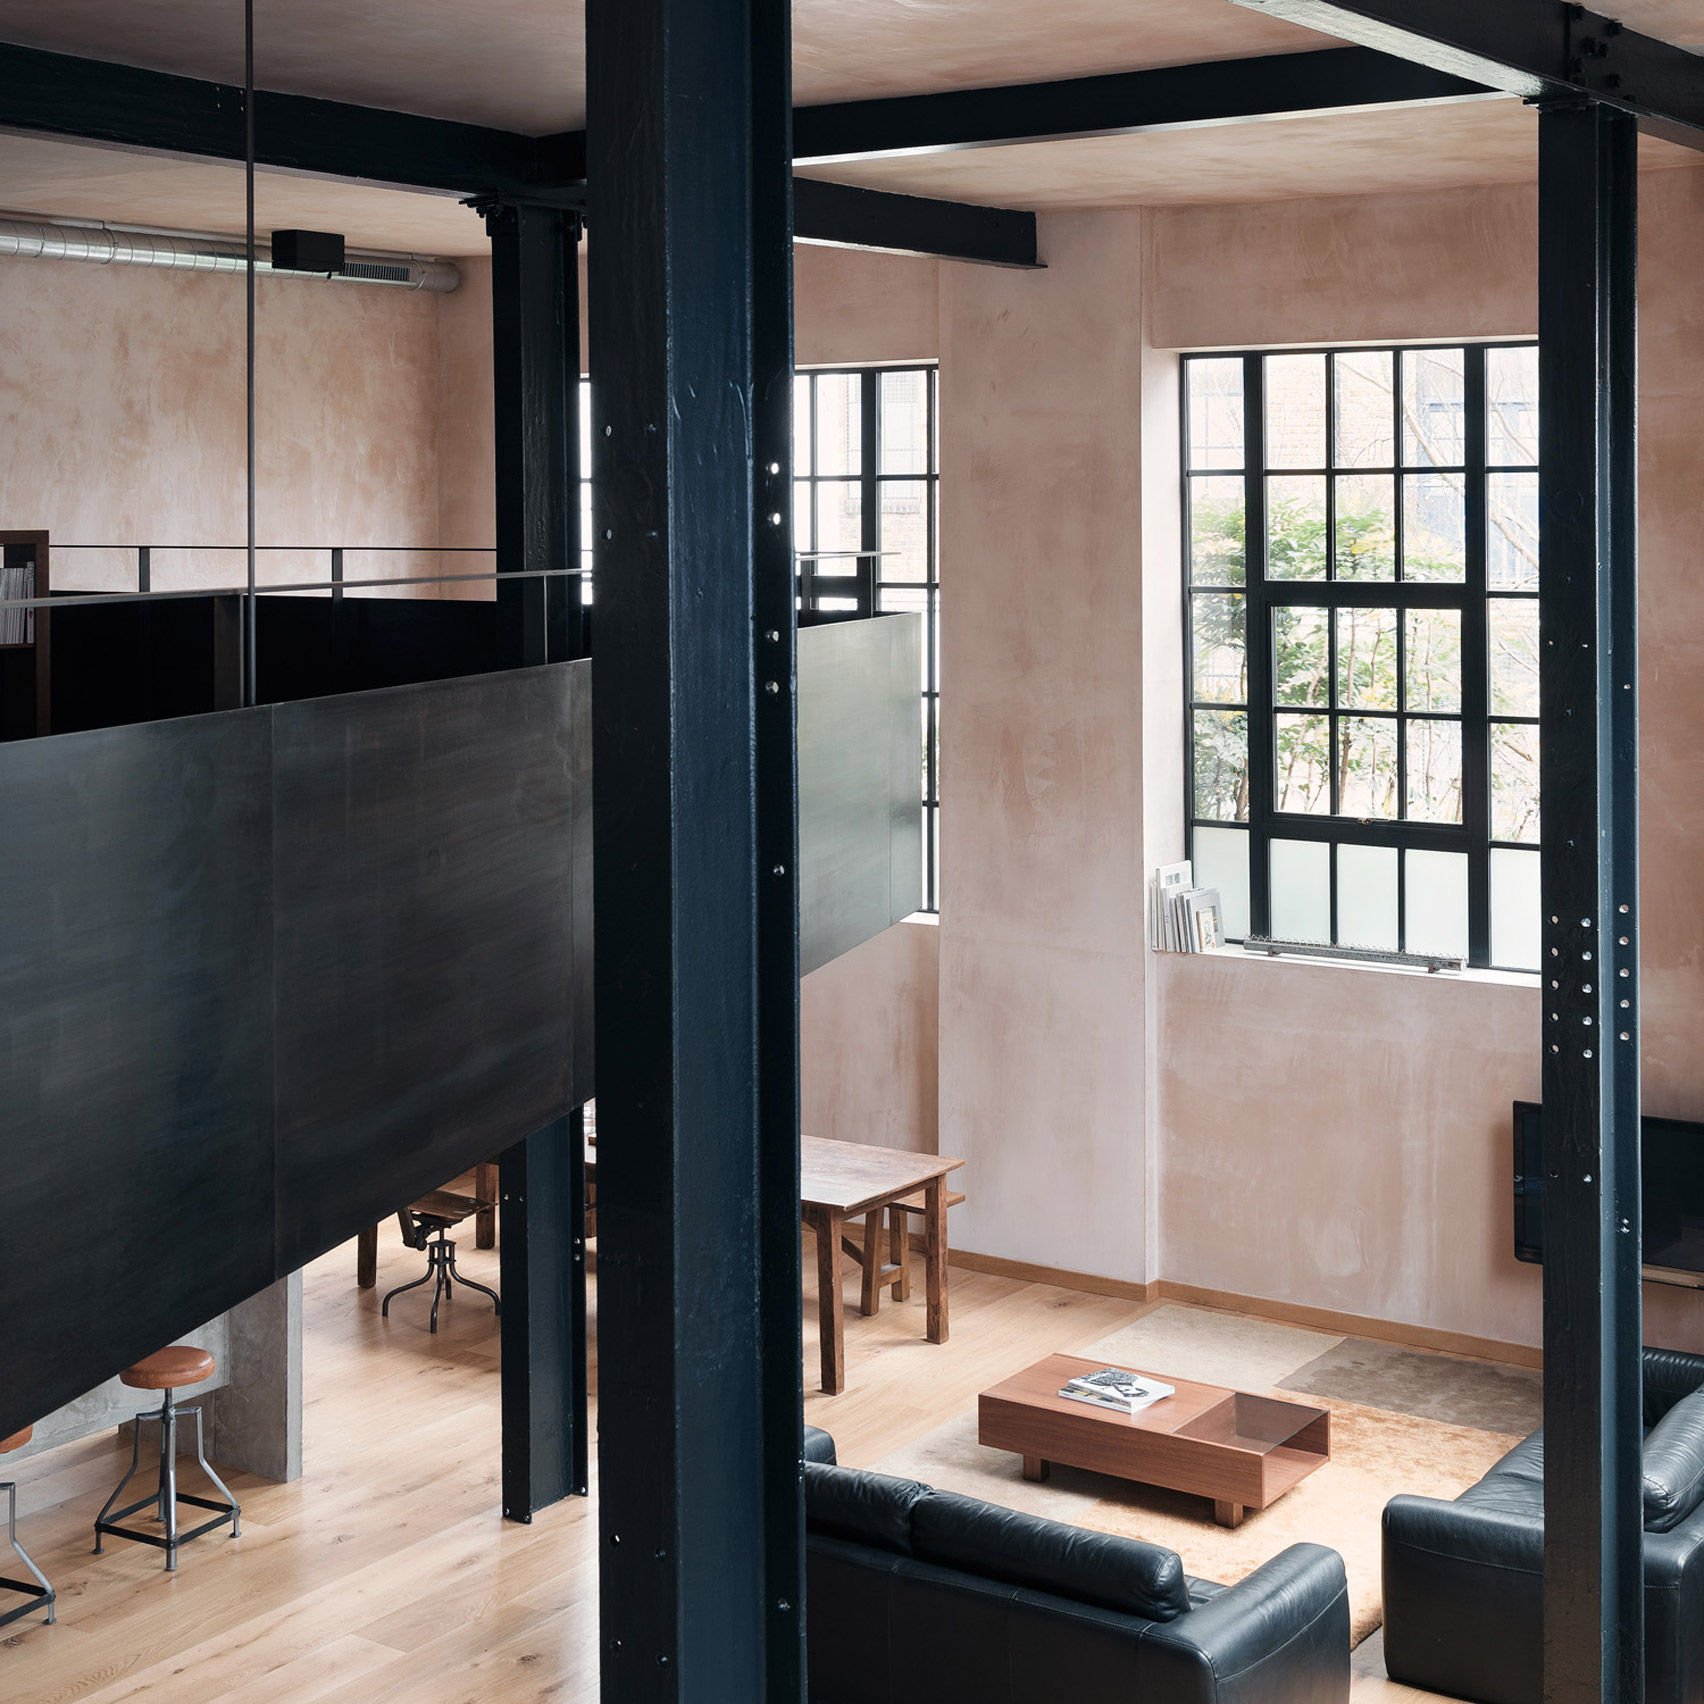 10 popular homes from Dezeen's Pinterest boards that reference their industrial past